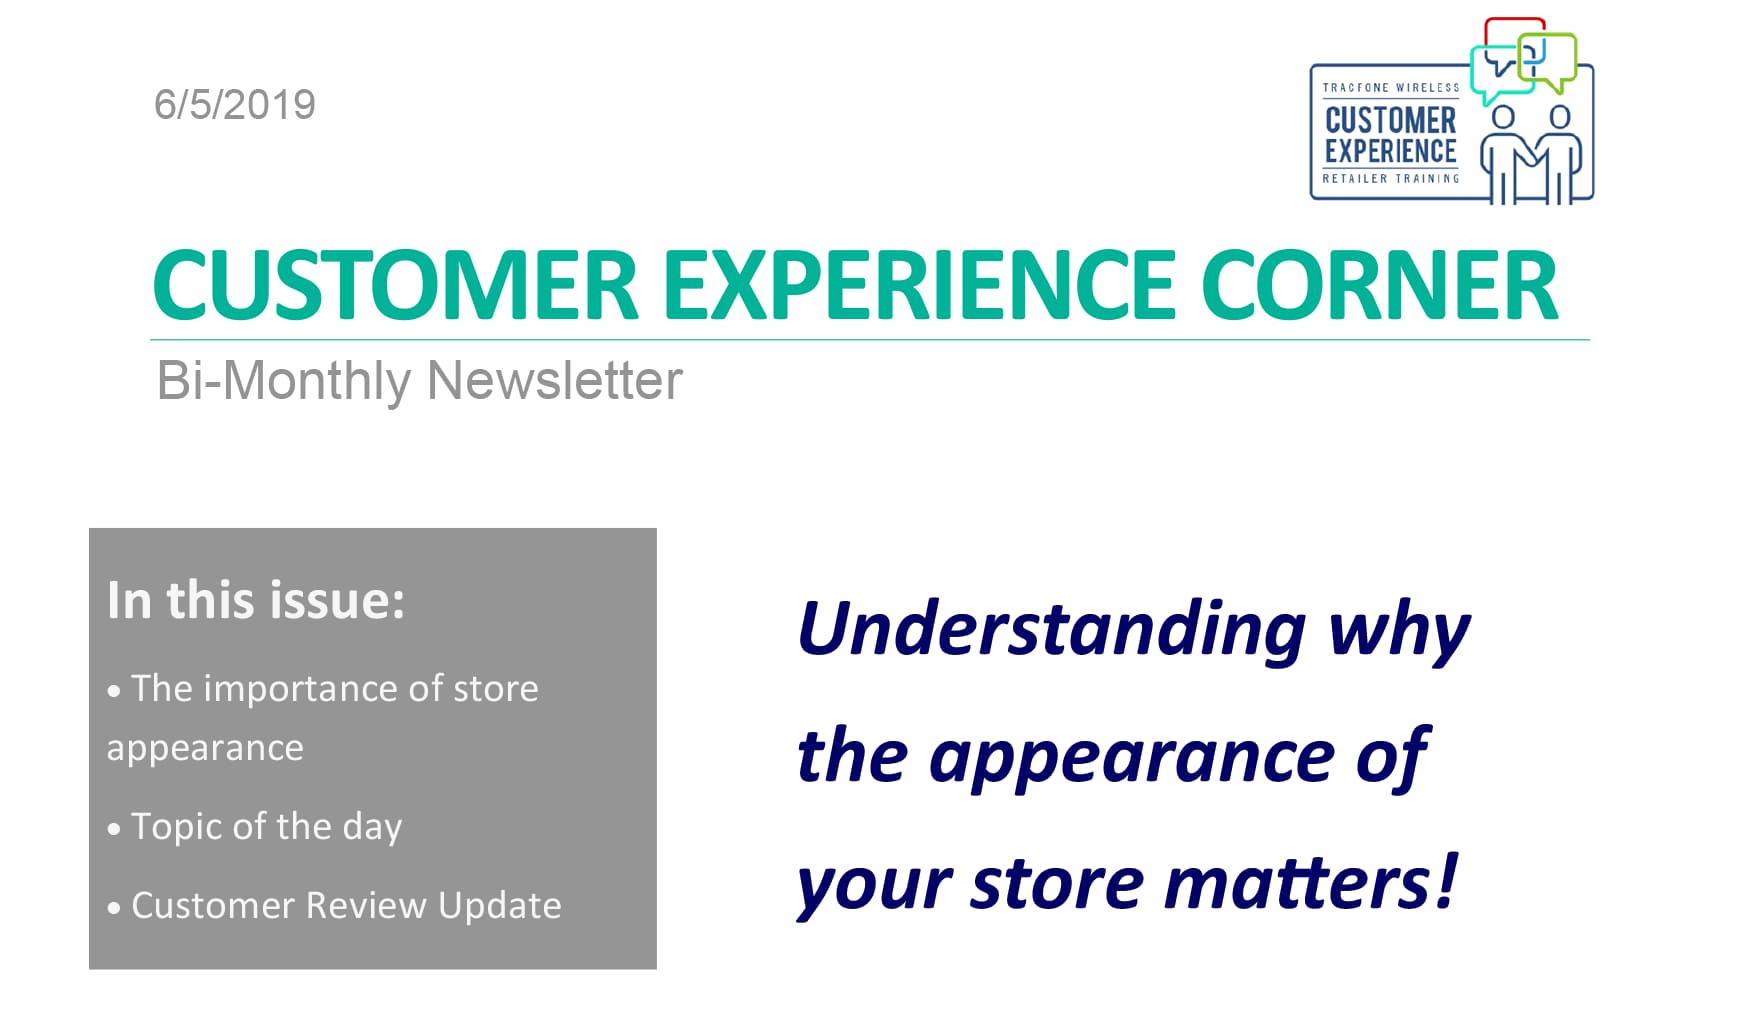 Customer Experience Corner Bi-Monthly Newsletter for Total Wireless Exclusive Dealers